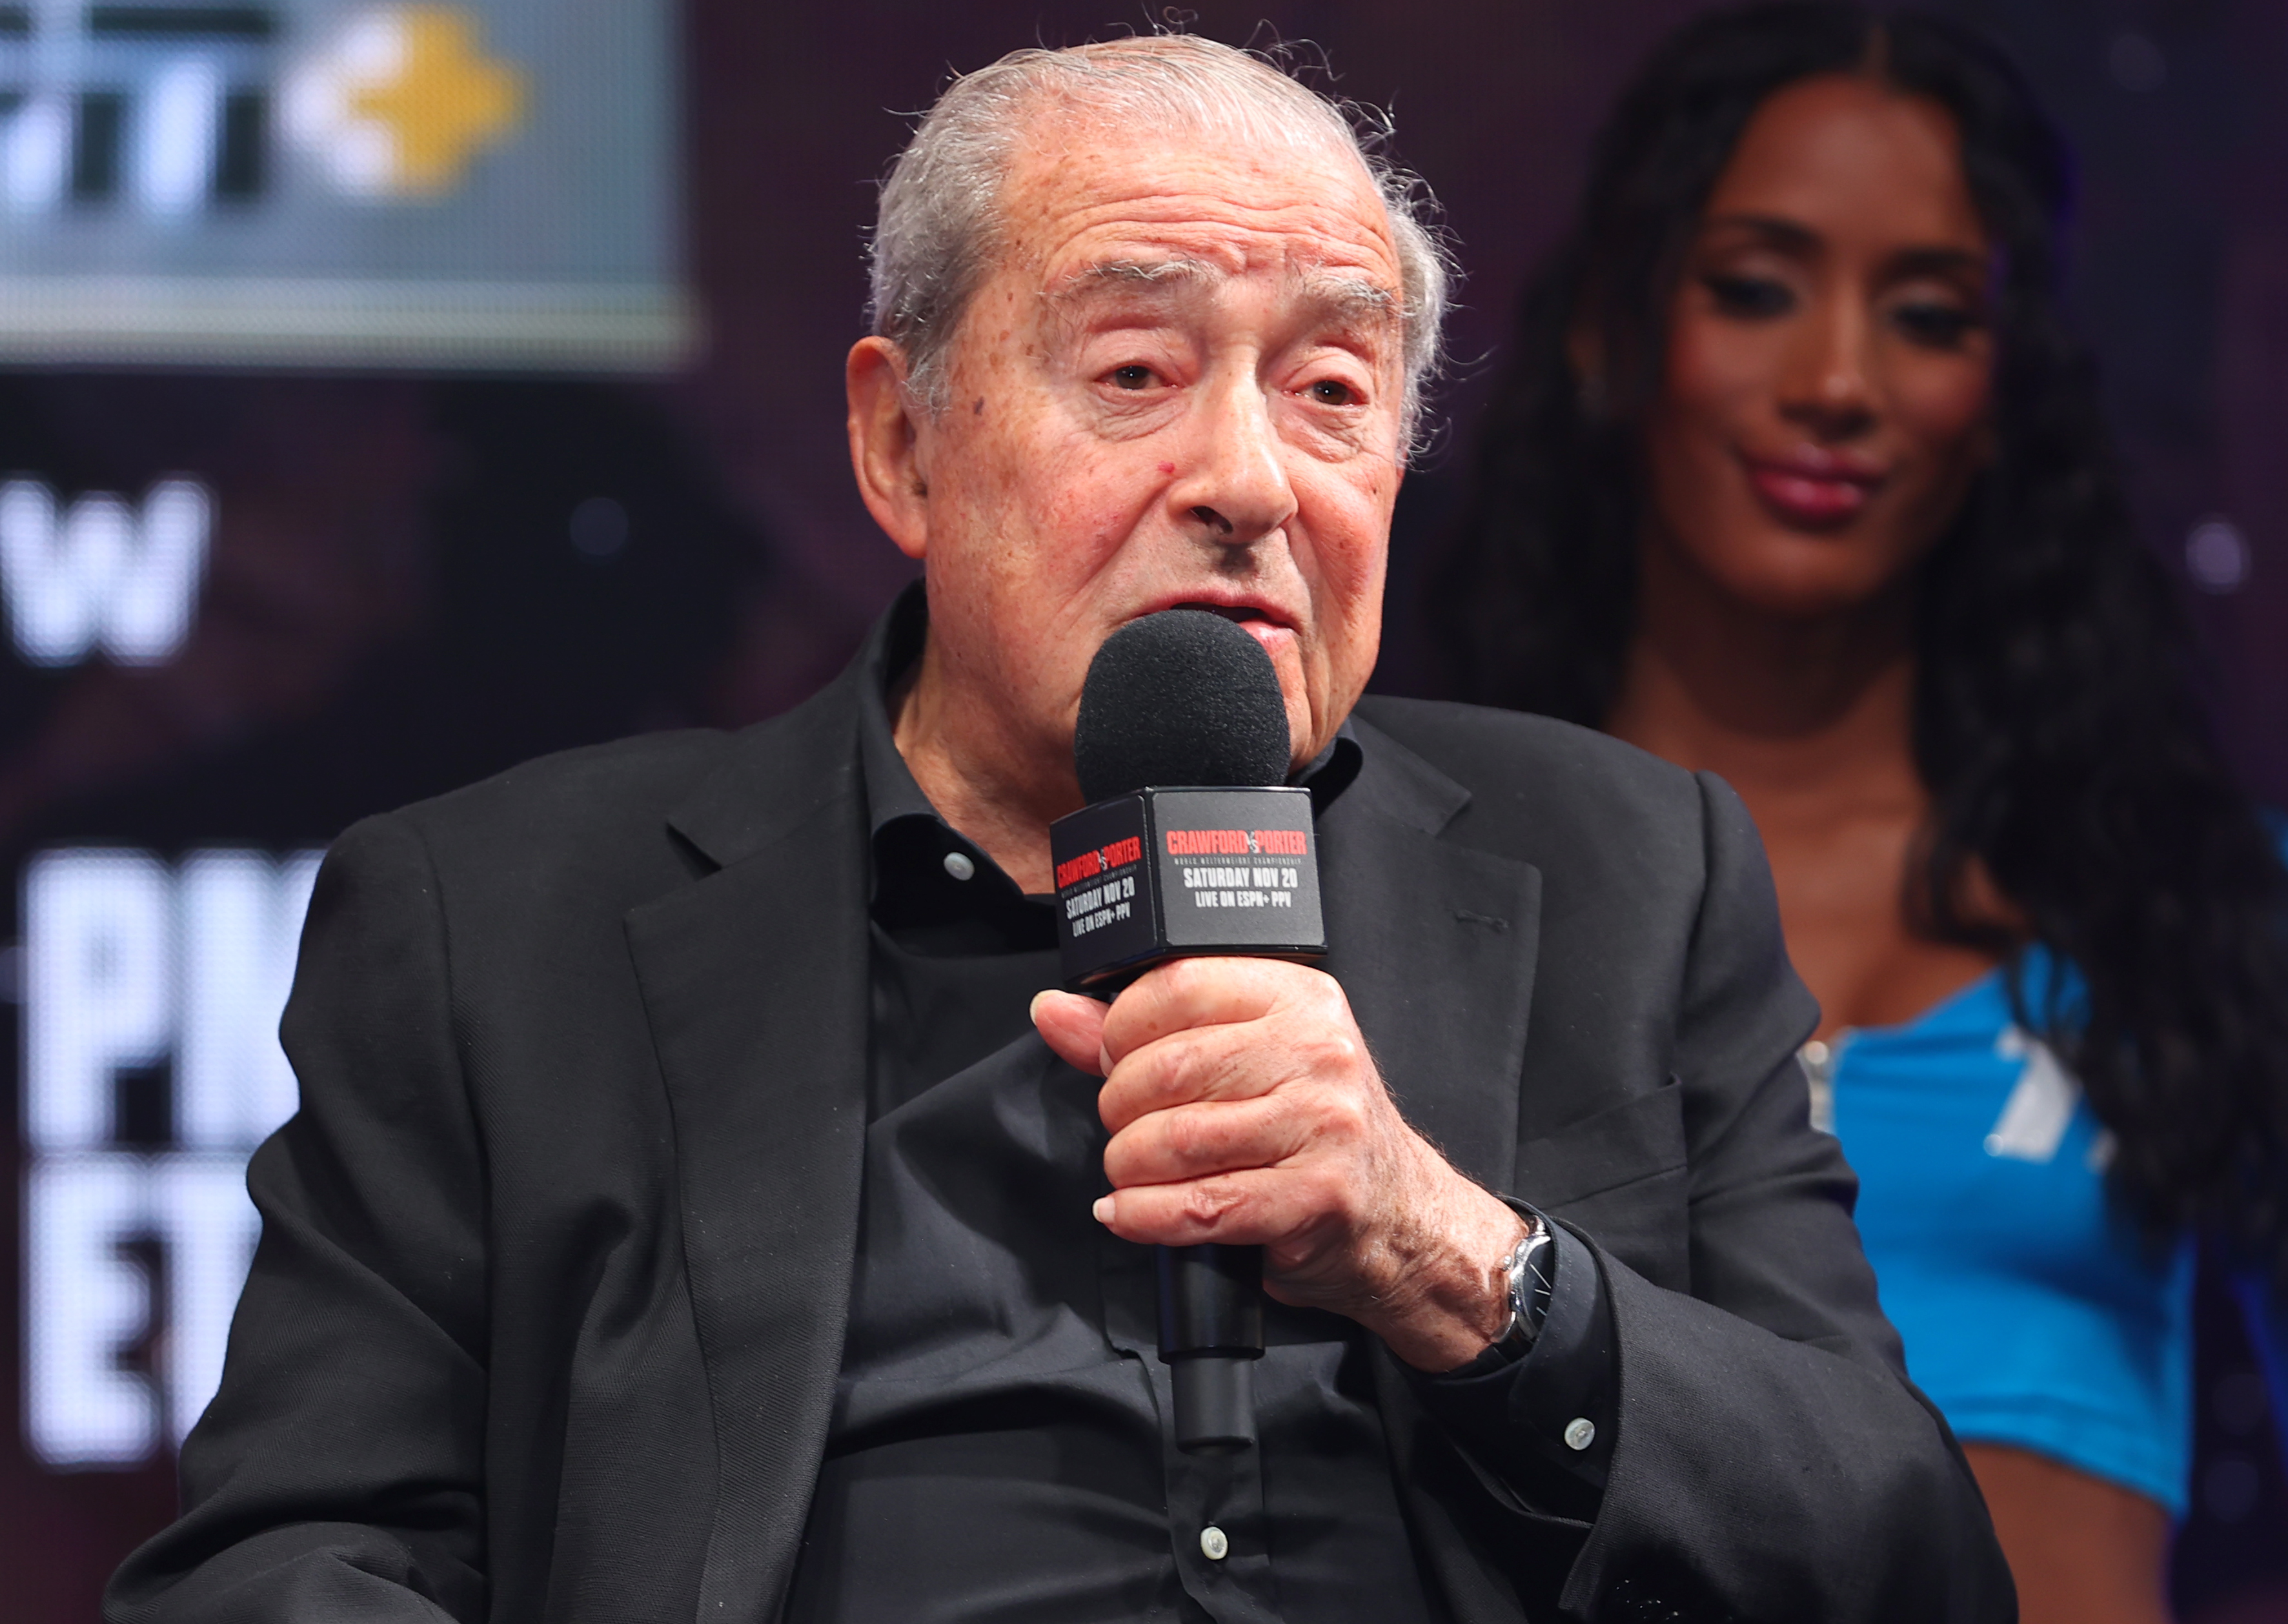 Arum insists Crawford’s lawsuit is frivolous and expects a court to see it the same way.